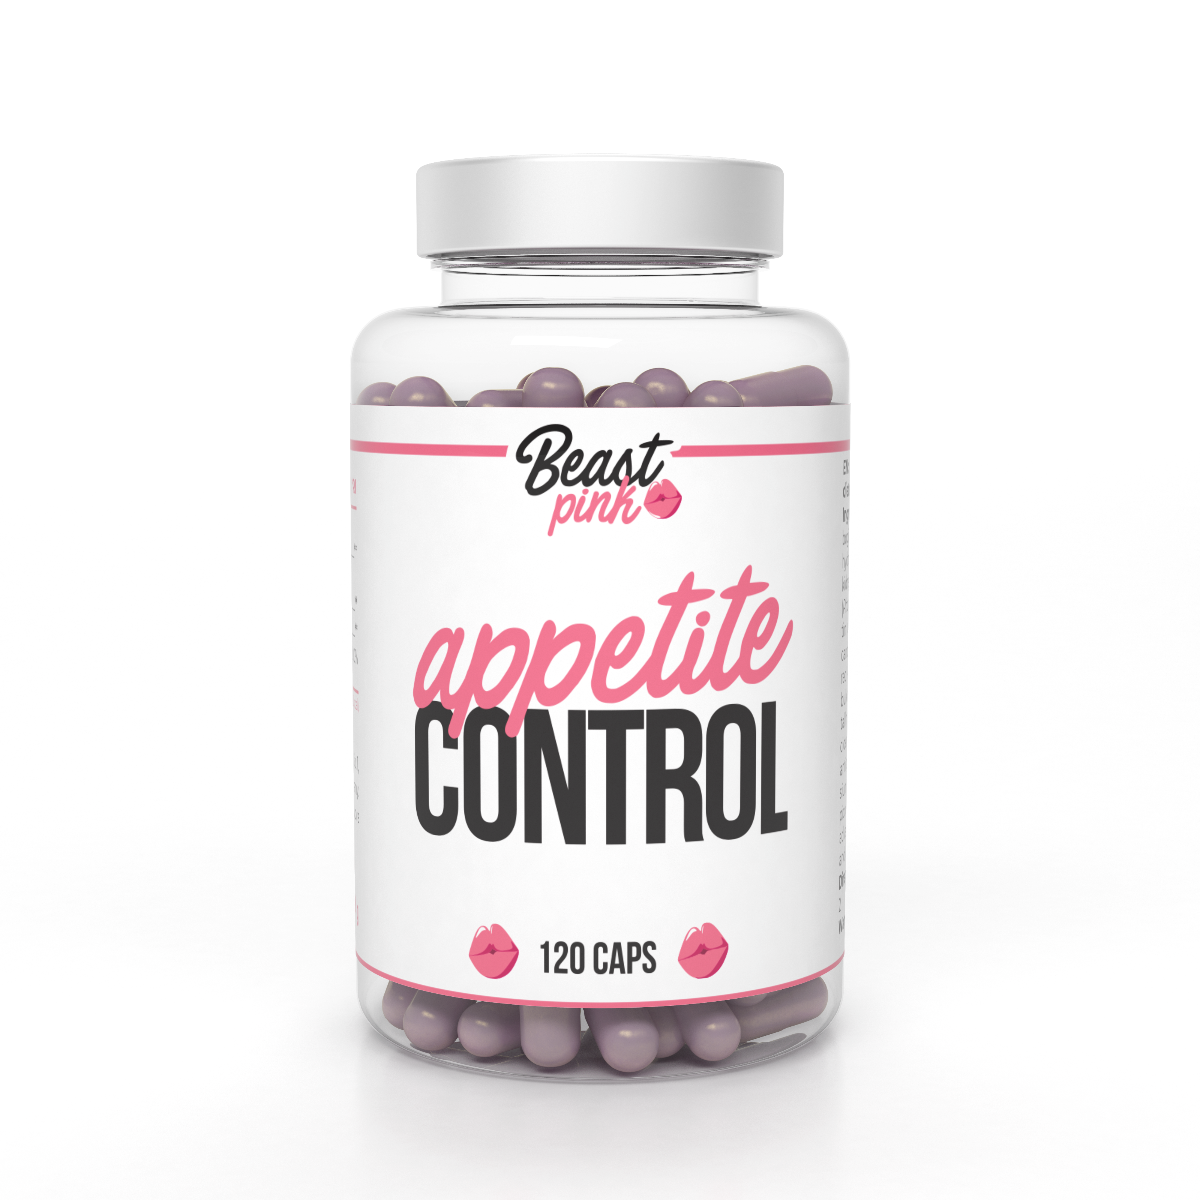 E-shop Appetite Control - BeastPink, 120cps